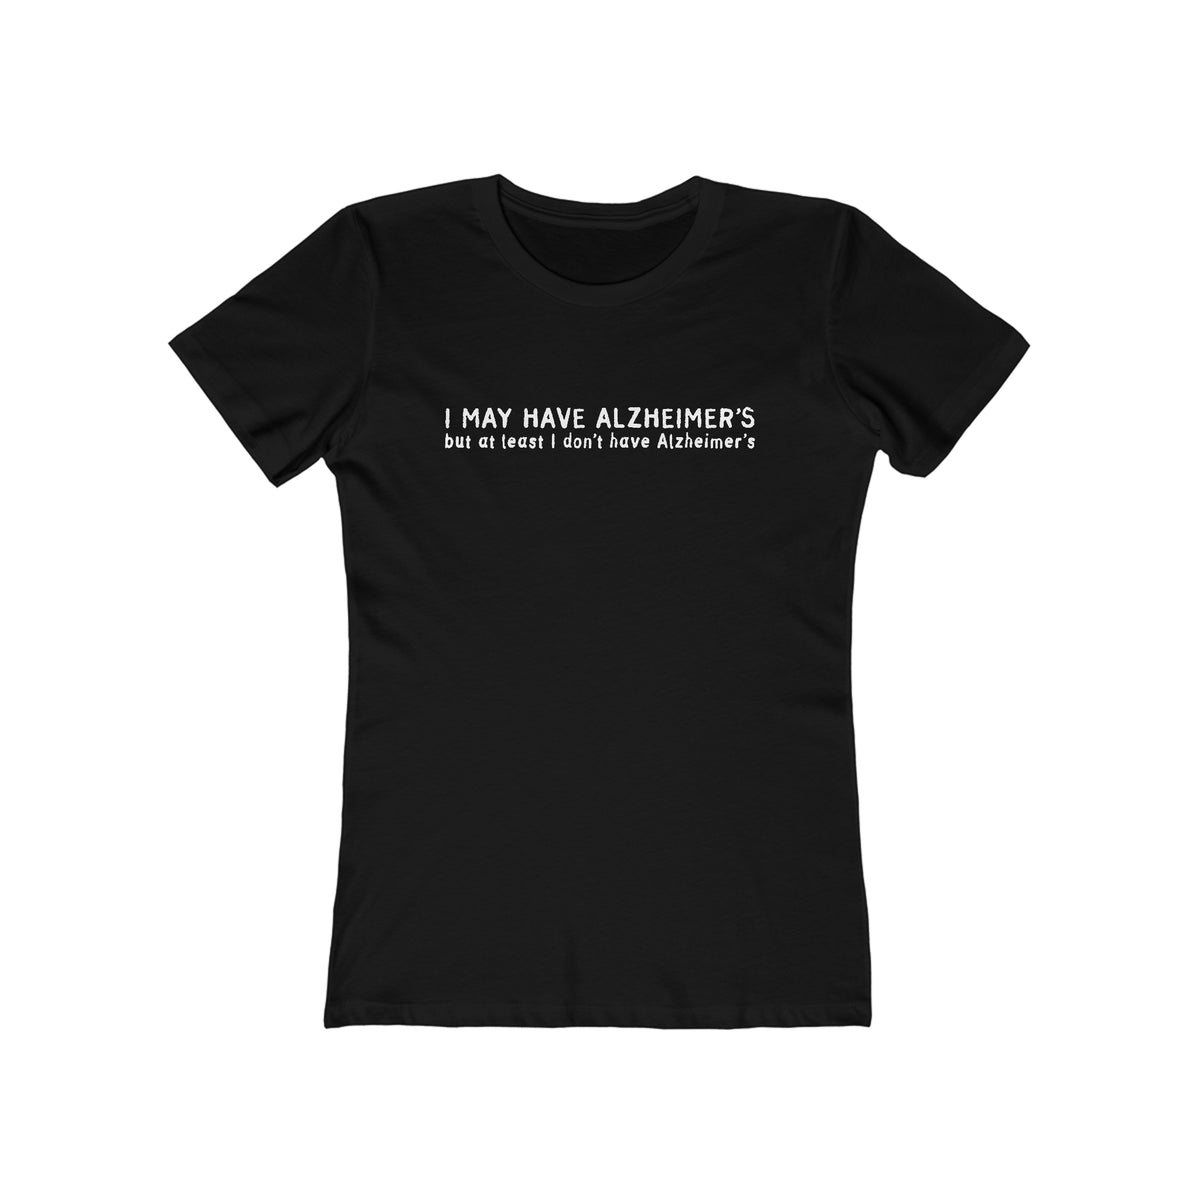 I May Have Alzheimer's But At Least I Don't Have Alzheimer's - Women’s T-Shirt